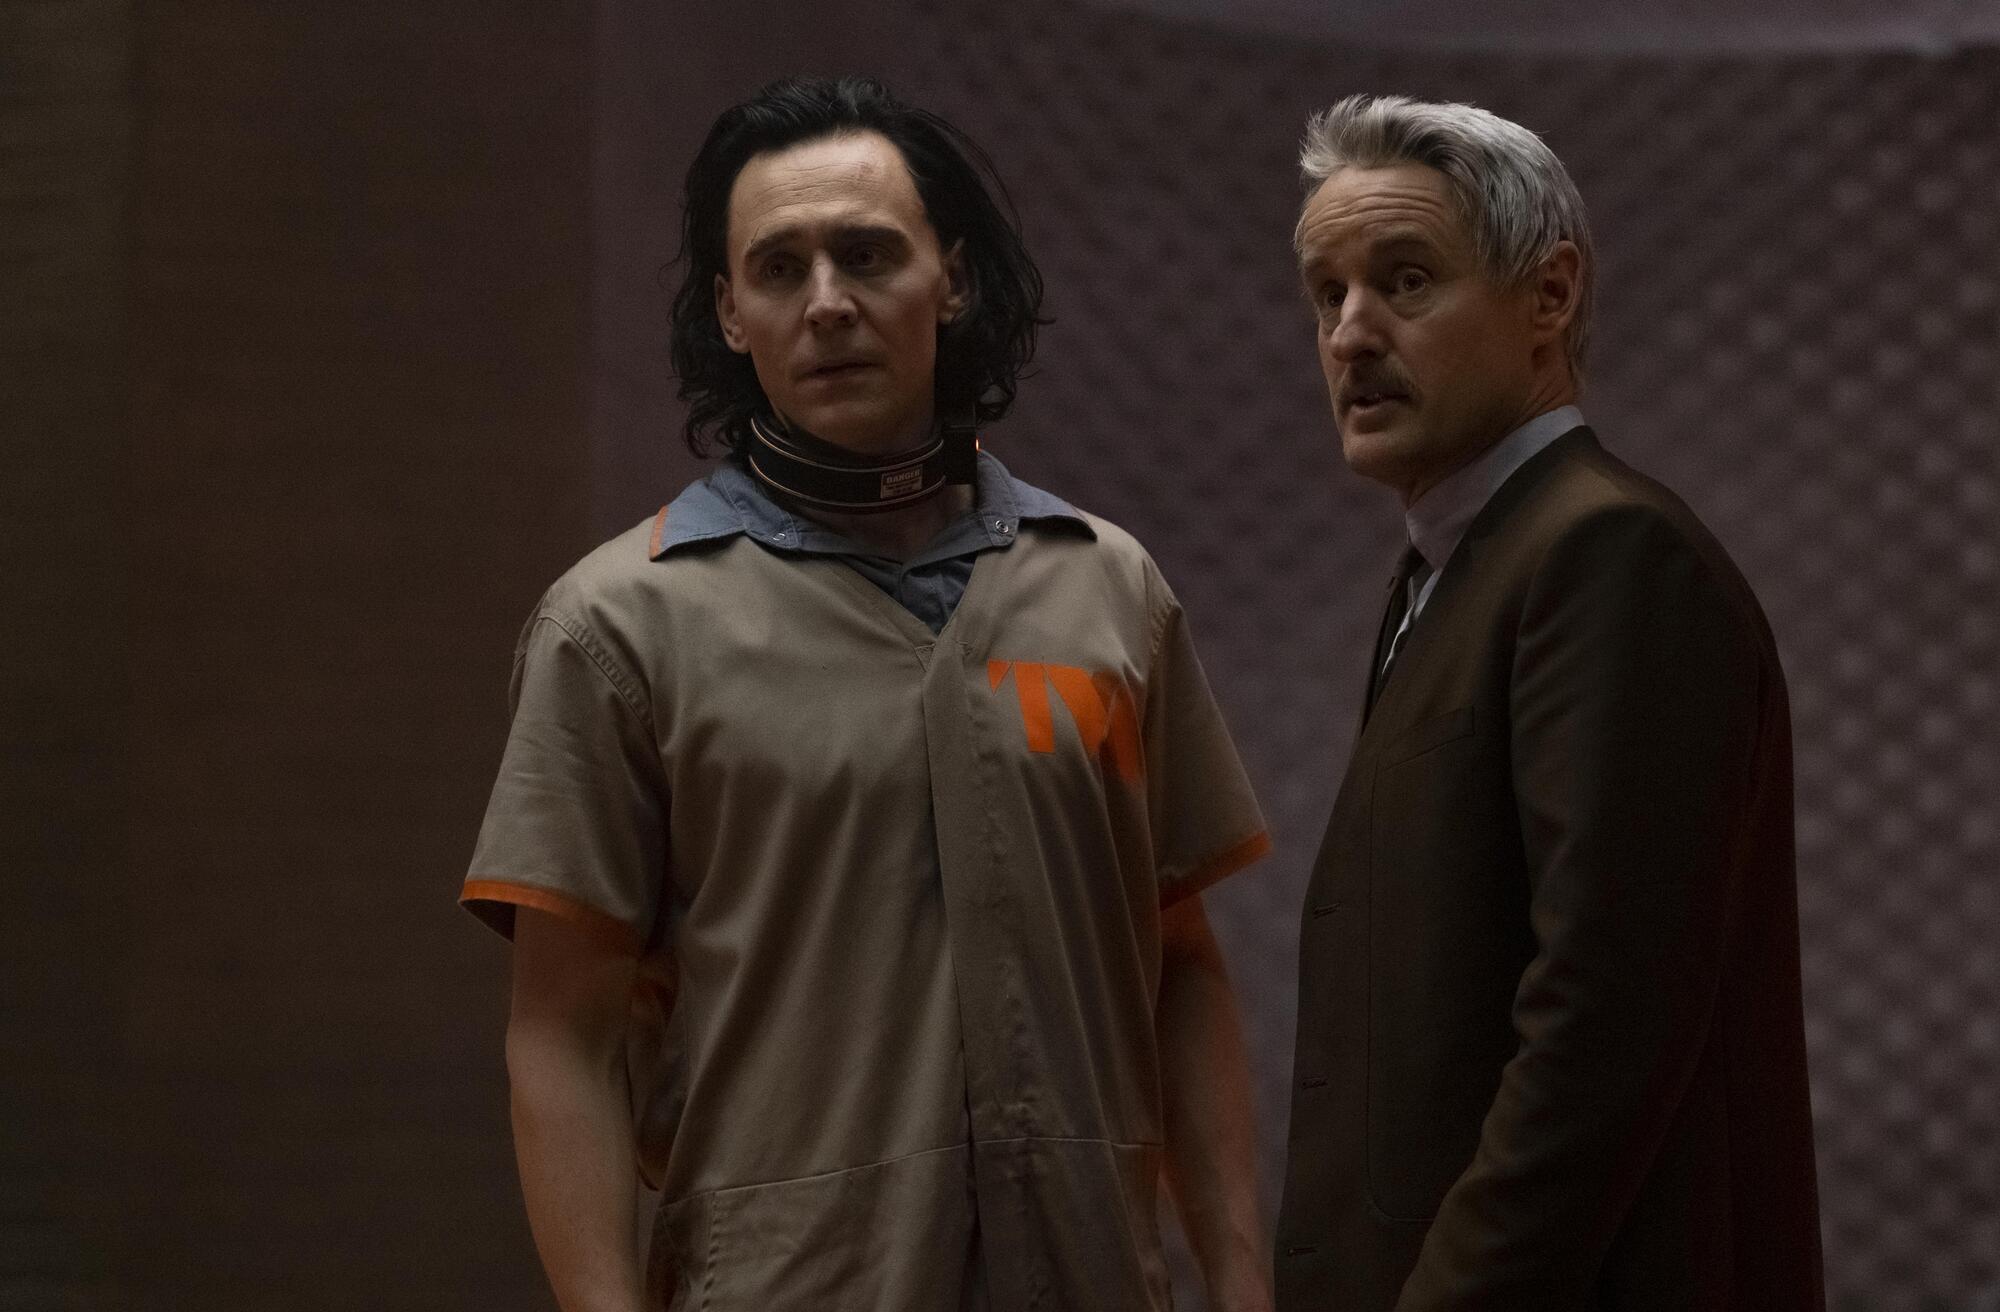 Tom Hiddleston as Loki and Owen Wilson as Mobius M. Mobius in a still from the 'Loki' TV series